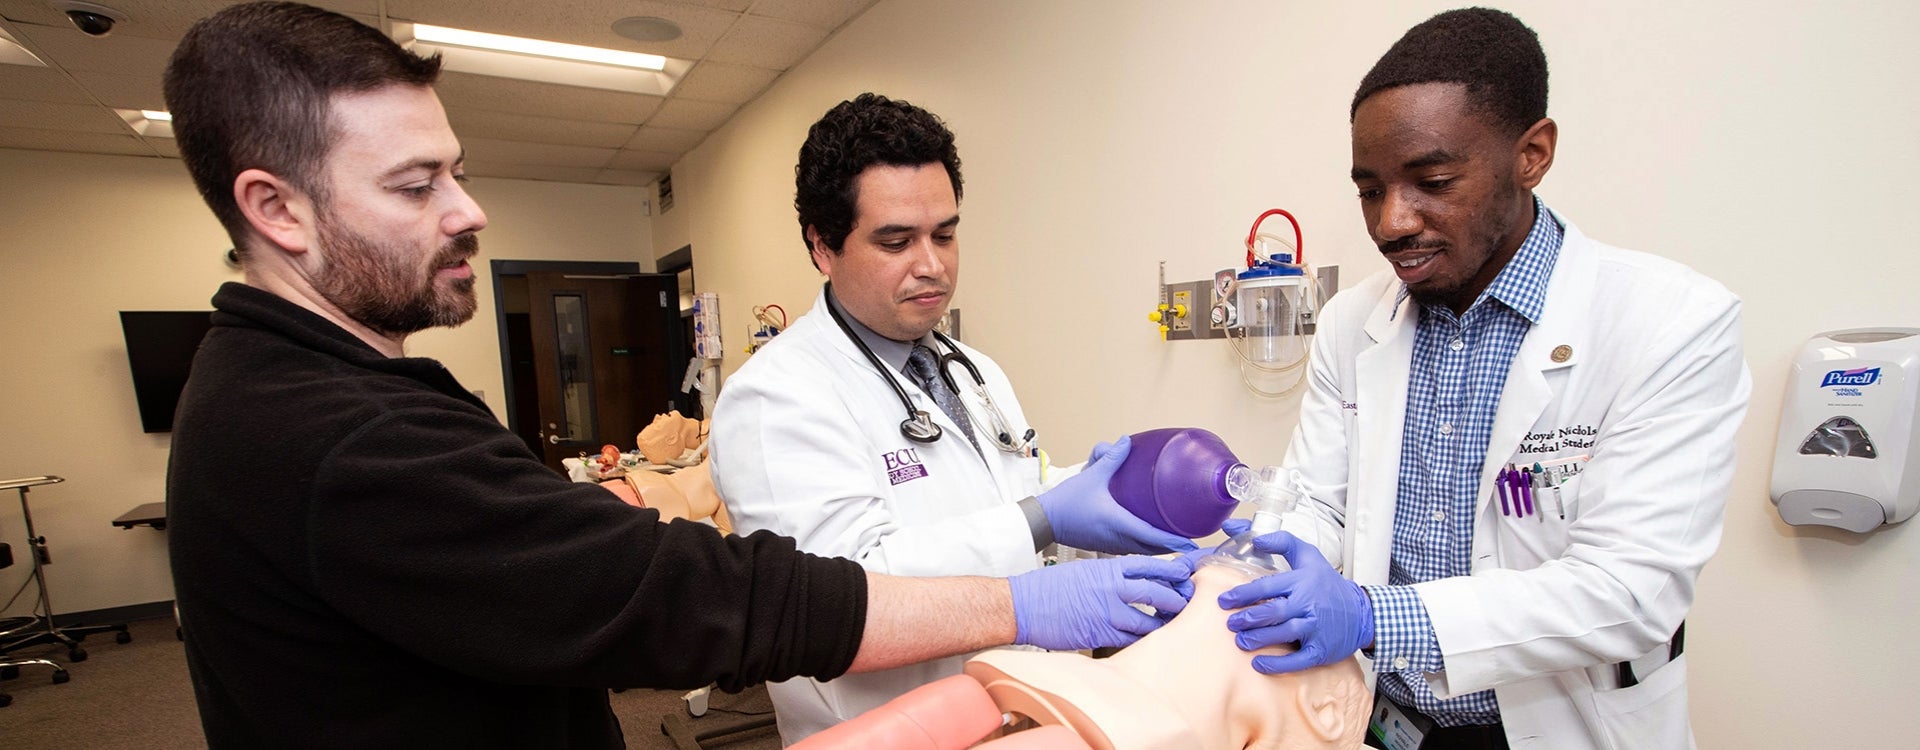 Medical students from the Brody School of Medicine work with an instructor to learn resuscitation techniques.